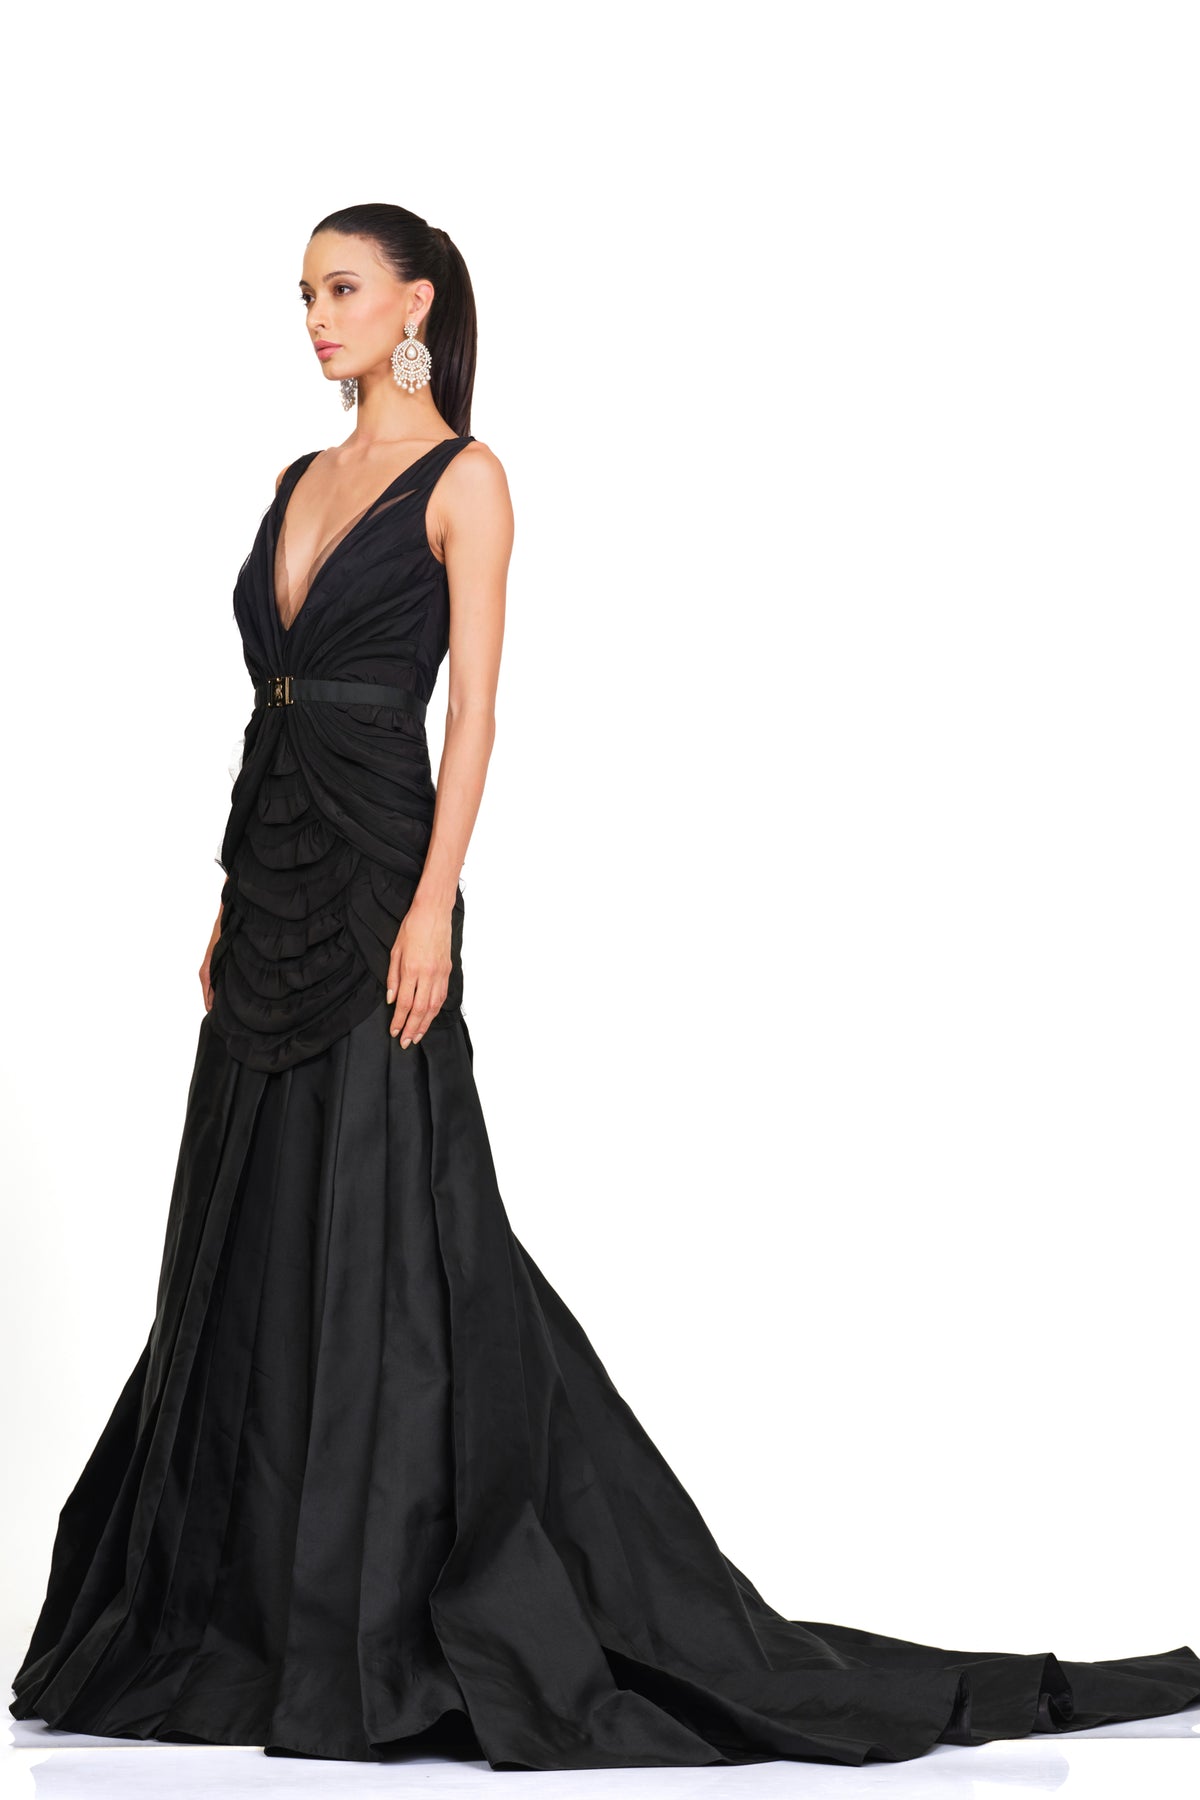 Frill Layered Black Gown